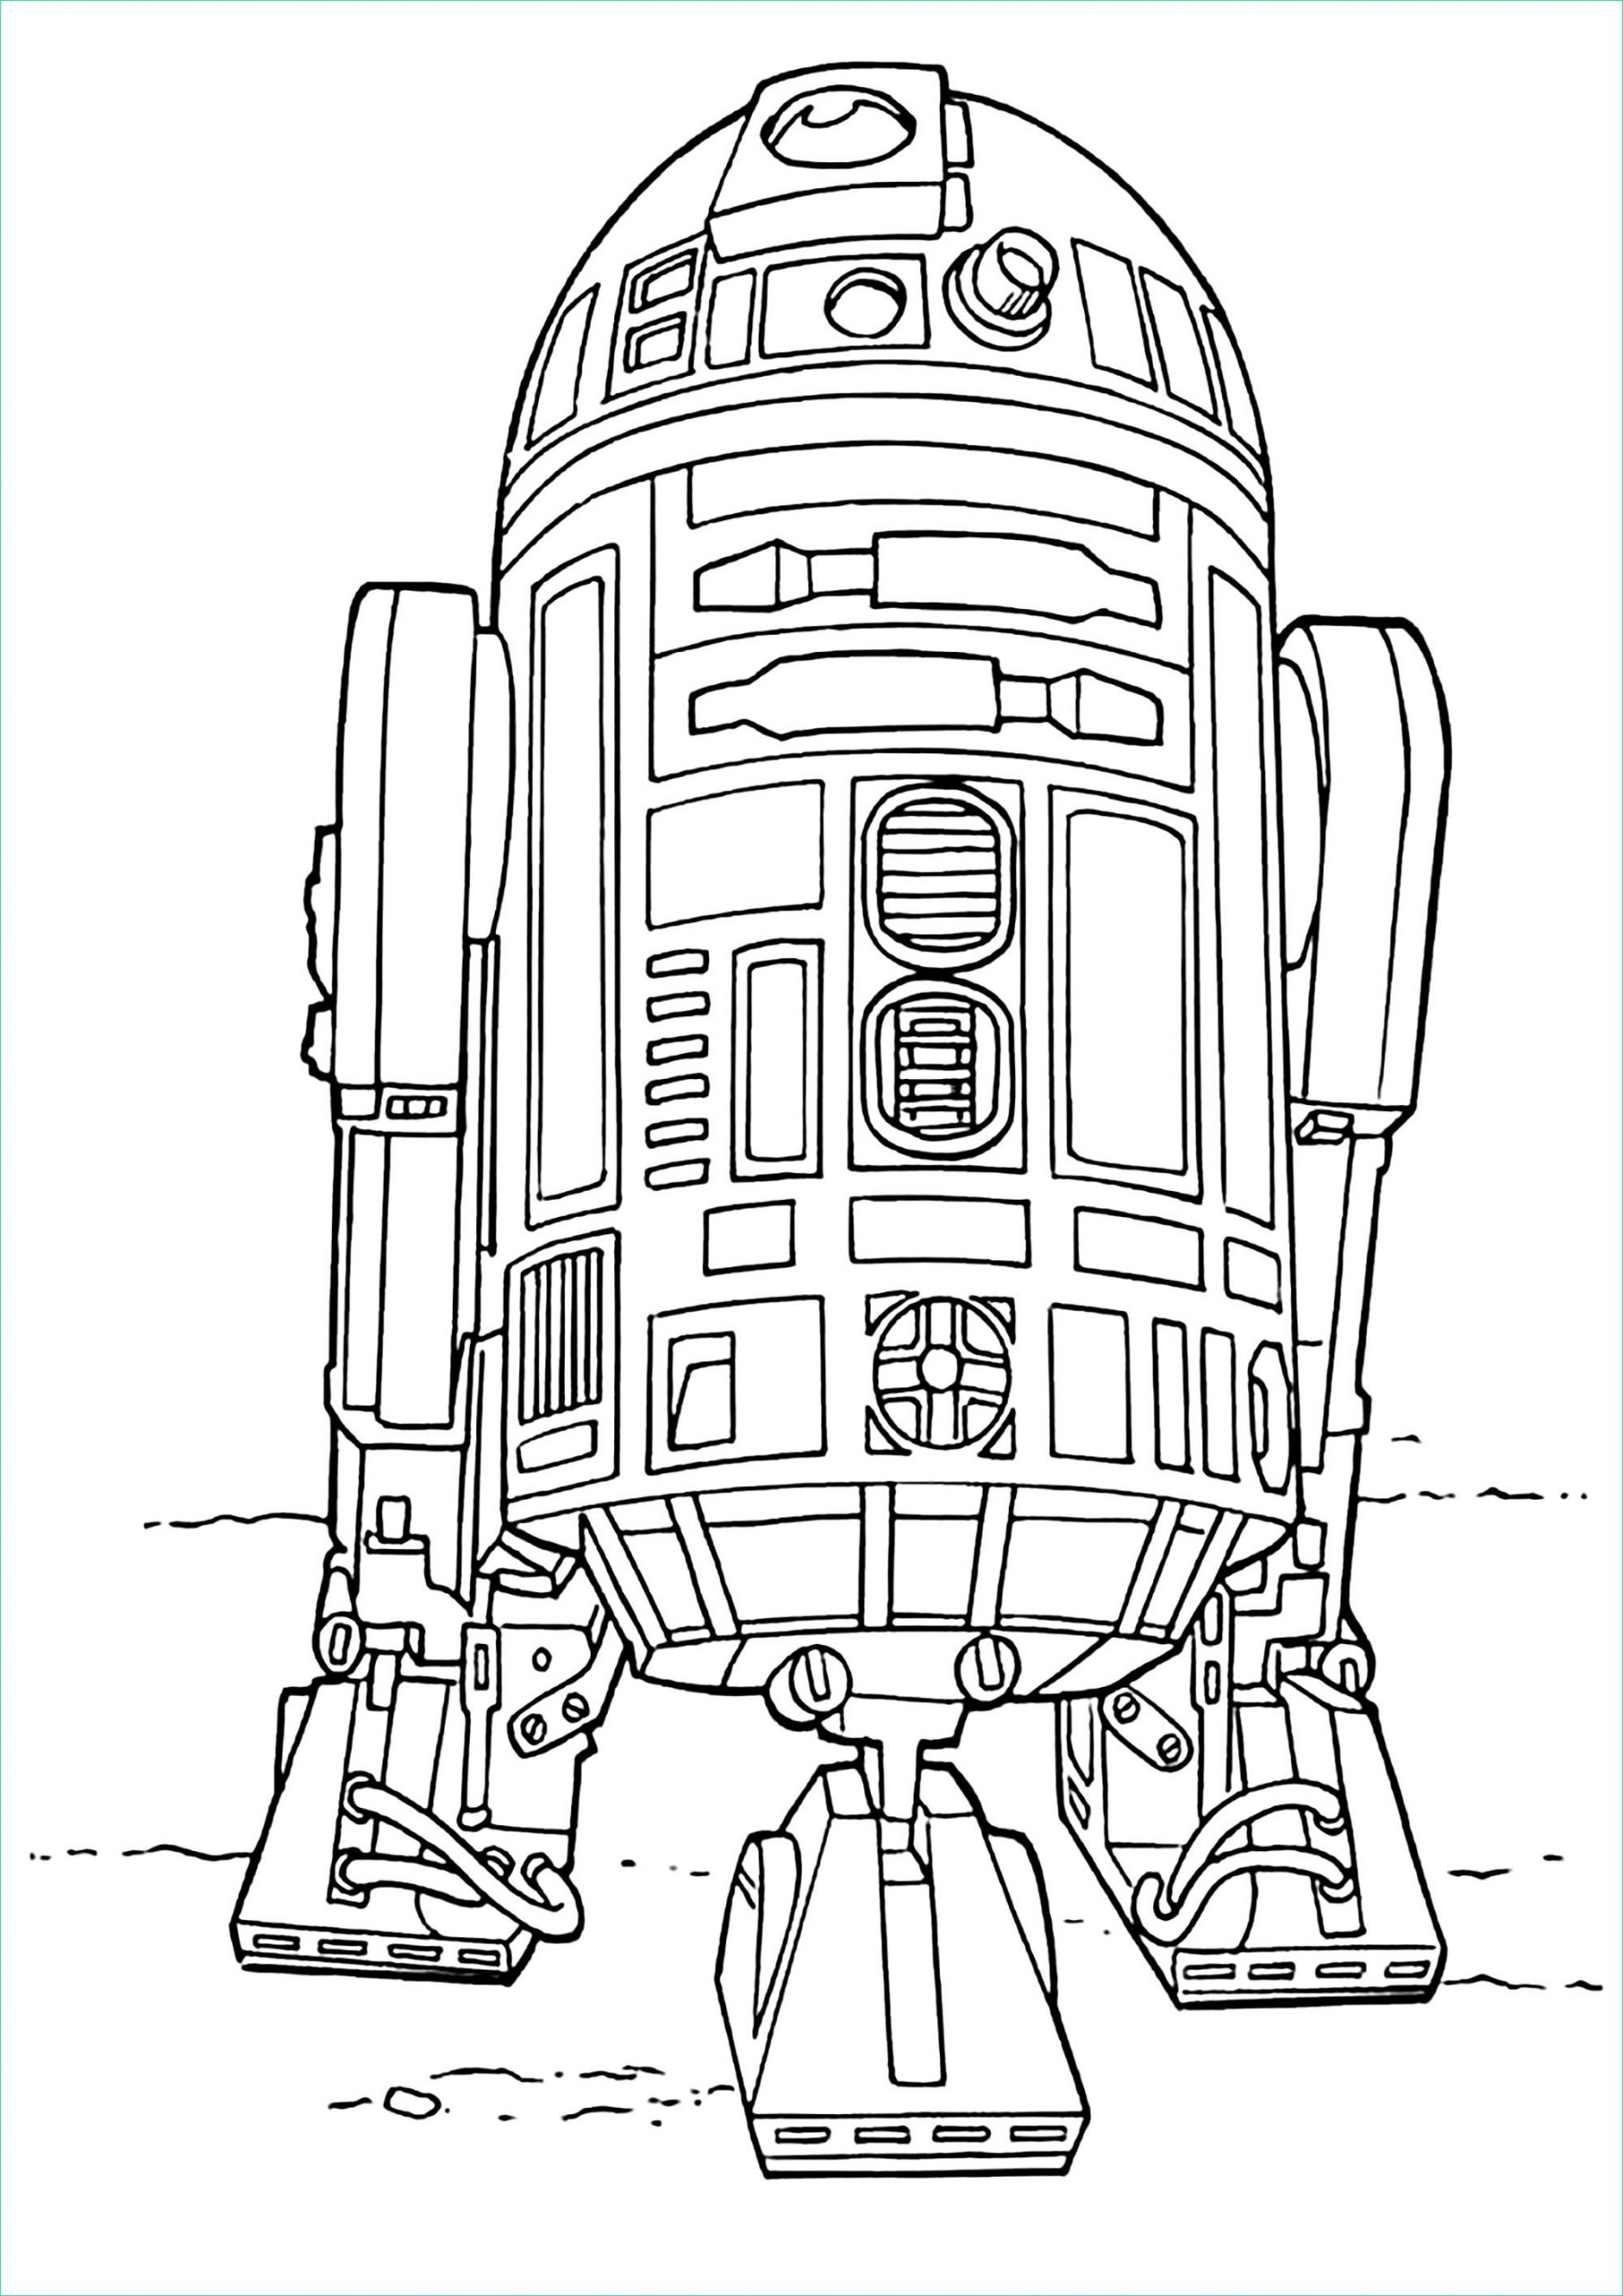 Coloriages Star Wars Inspirant Stock Star Wars R2d2 Coloriage Star Wars Coloriages Pour